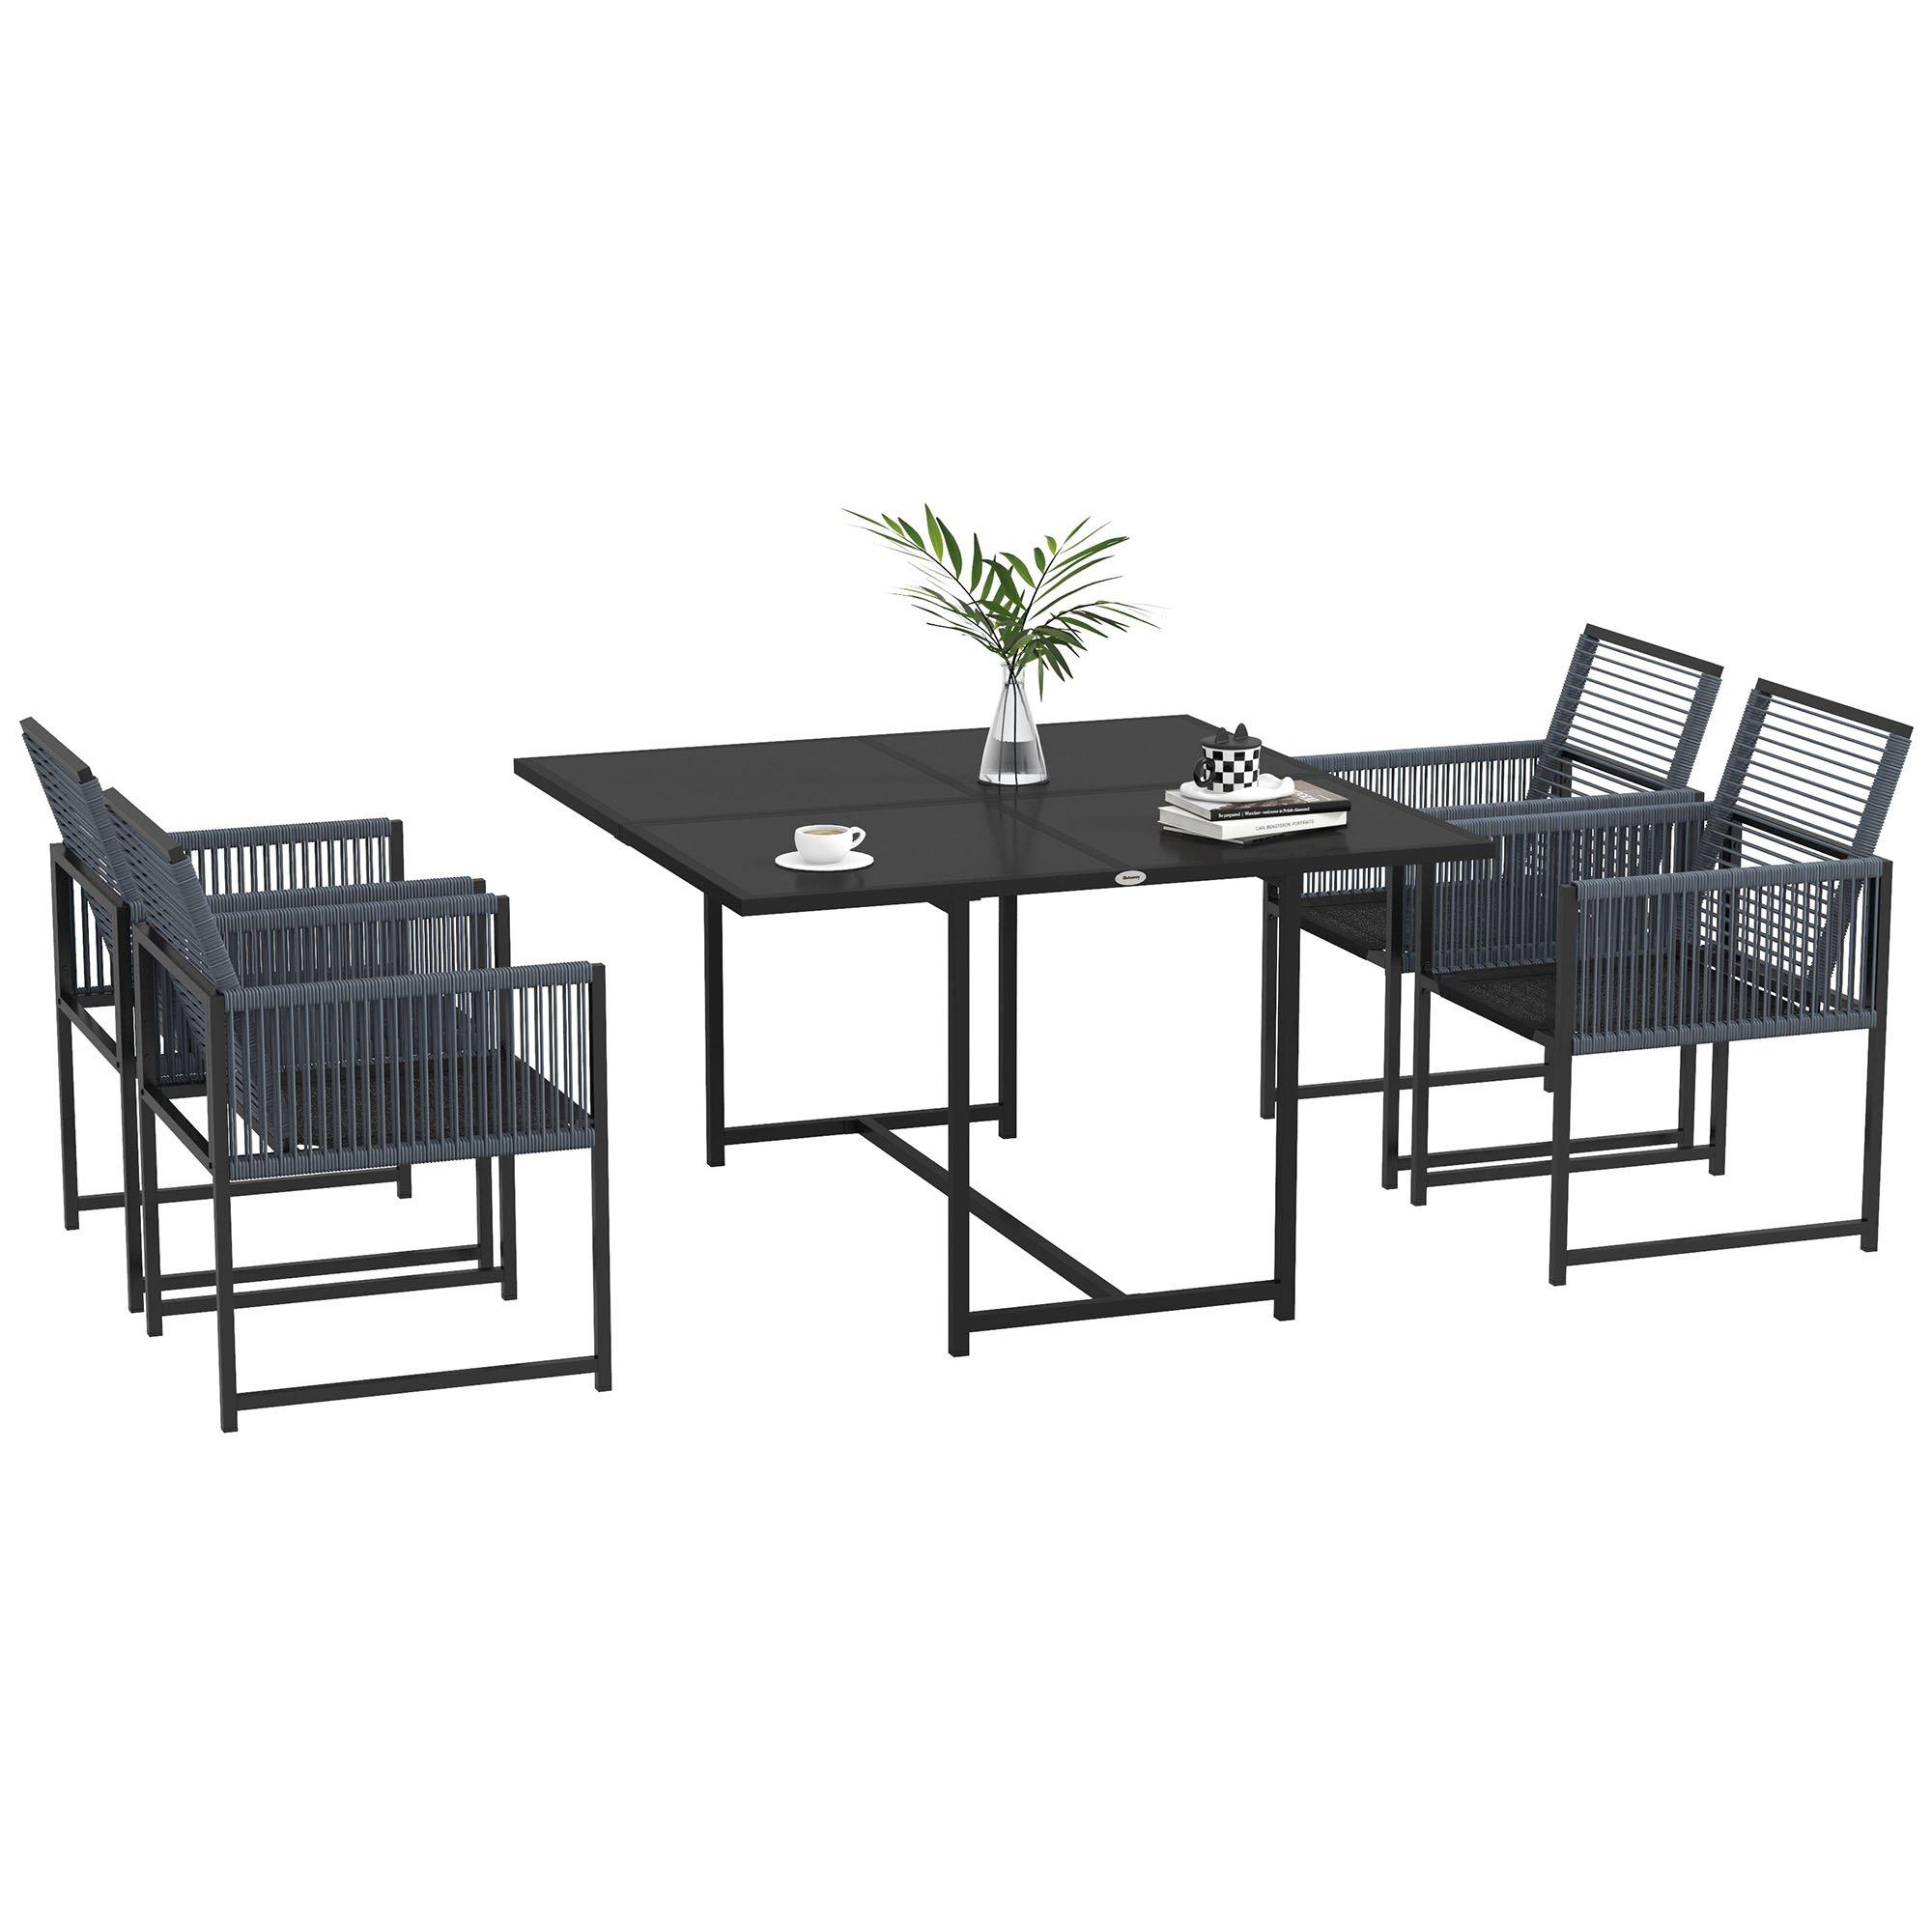 5 Pieces Patio Dining Set Outdoor Table and Chairs Space-Saving Dark Grey